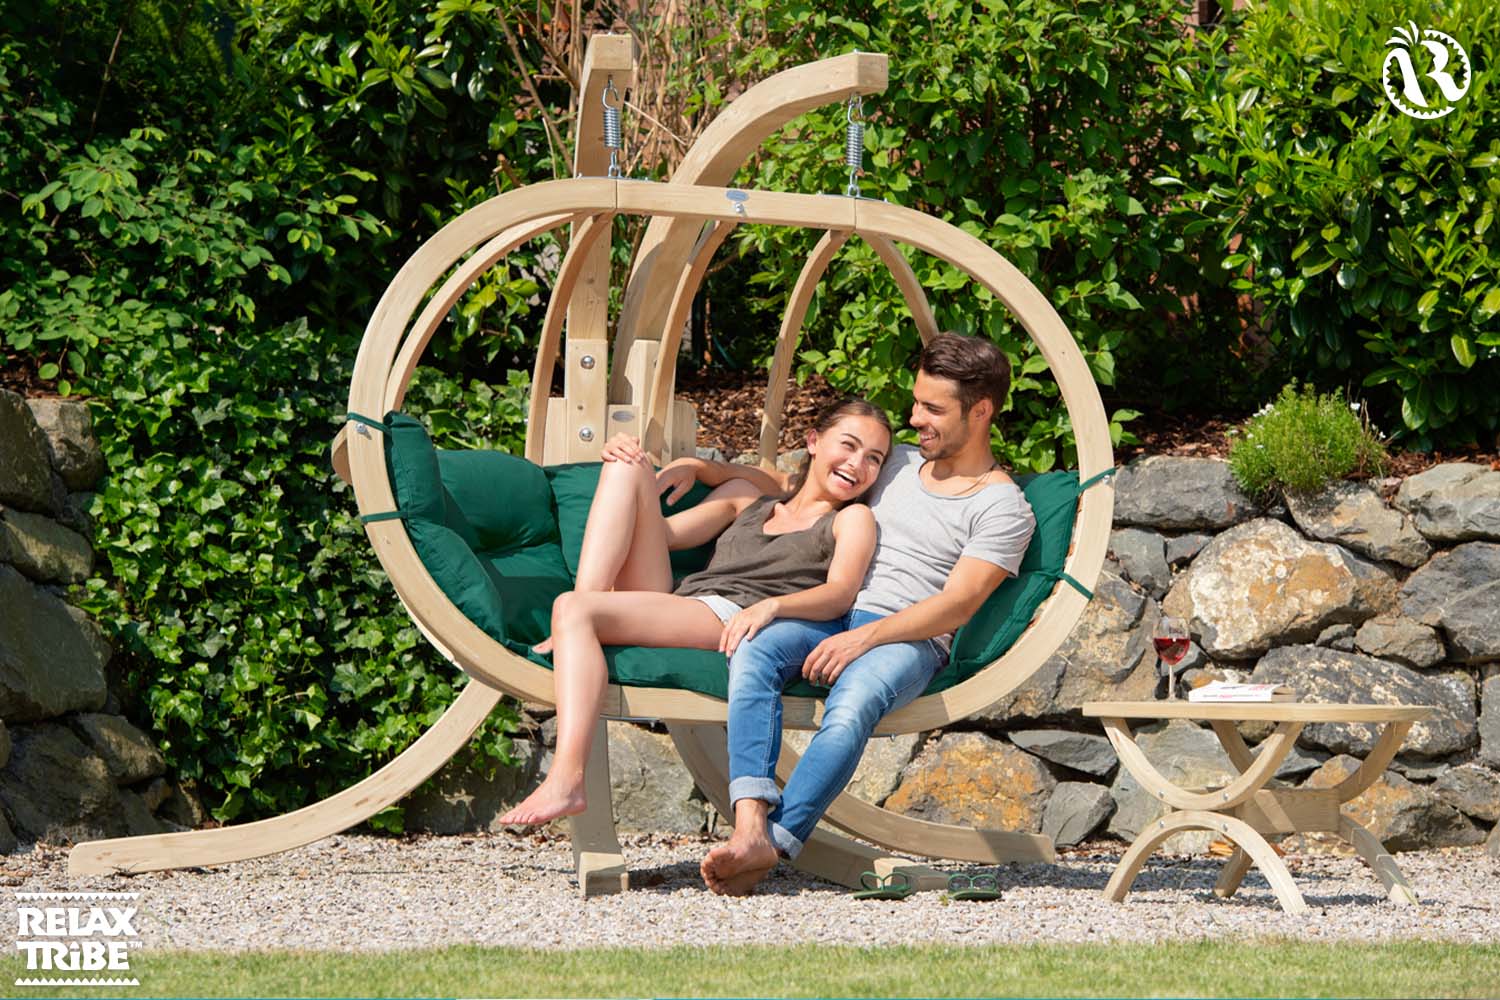 globo-royal-stand-xl-hanging-chair-frame-fsc-wood-home-garden-weatherproof-and-globo-royal-verde-and-tavolino